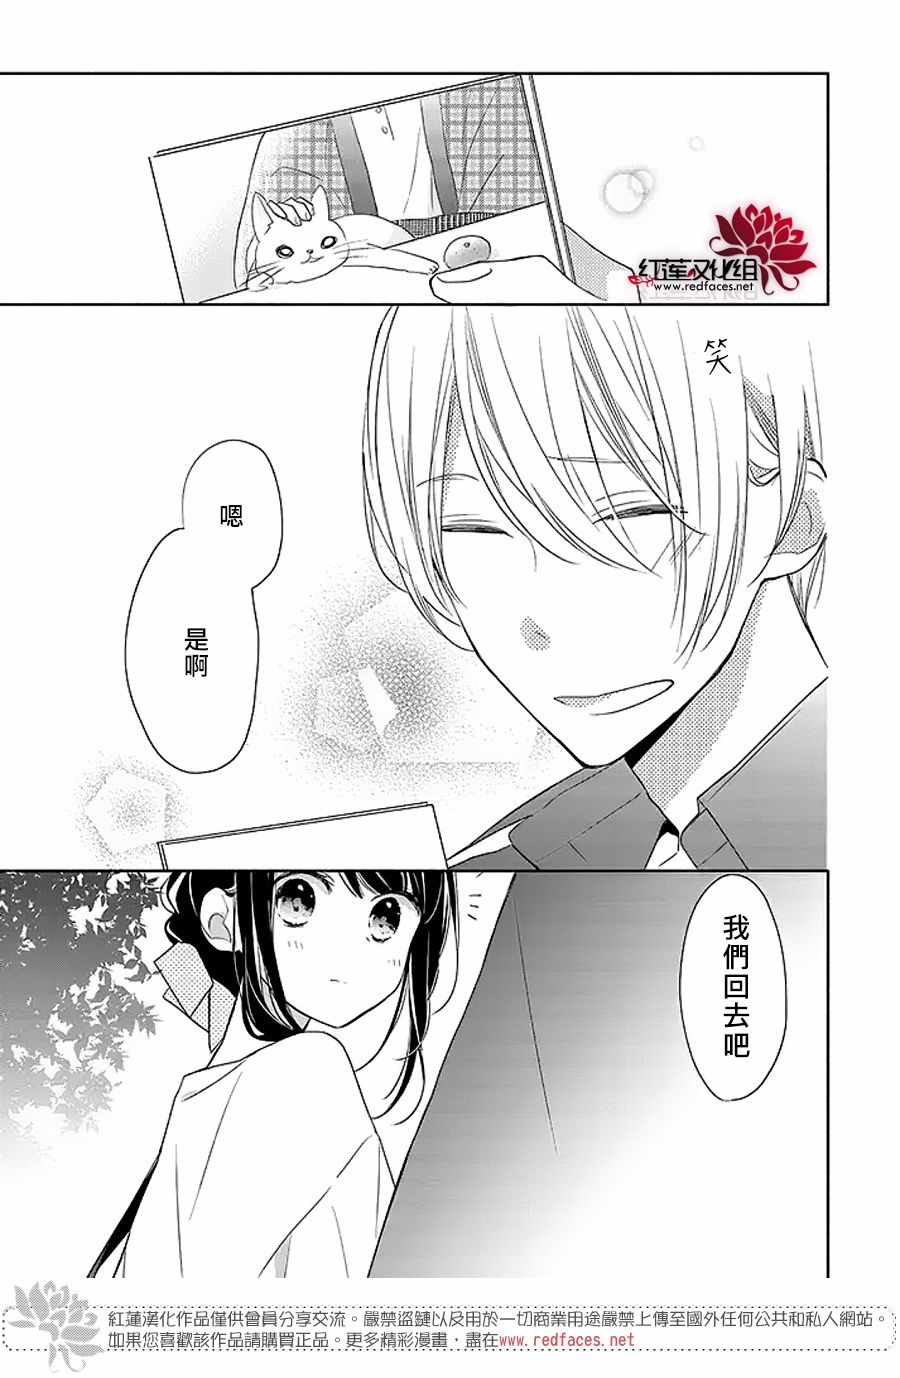 《If given a second chance》漫画 second chance 013话